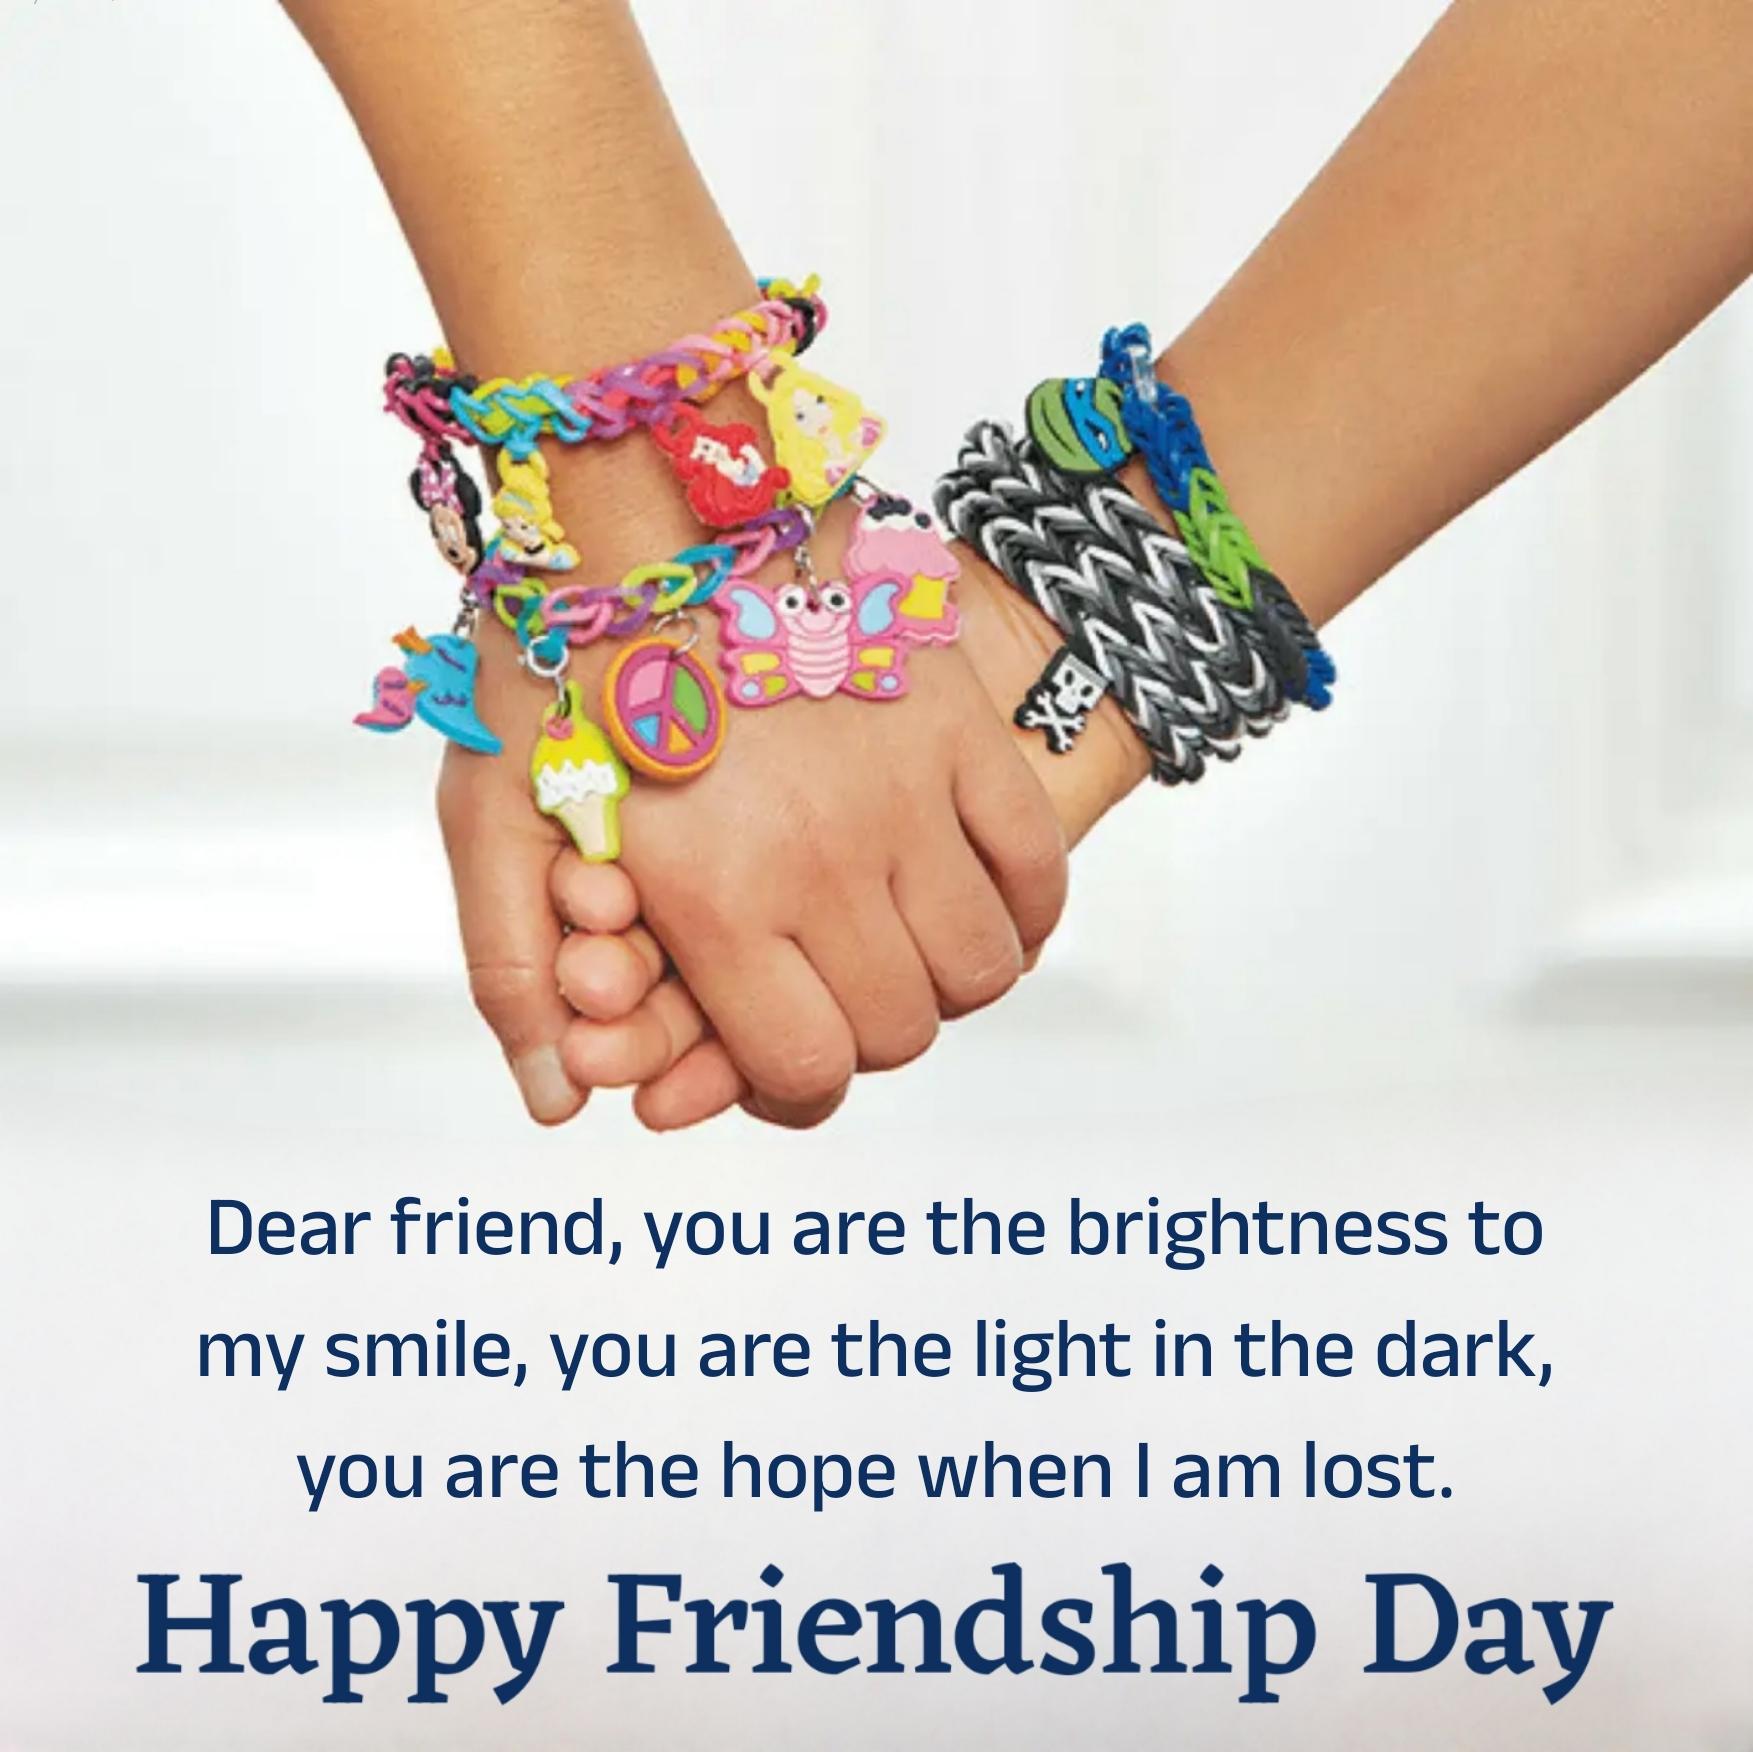 Dear friend you are the brightness to my smile